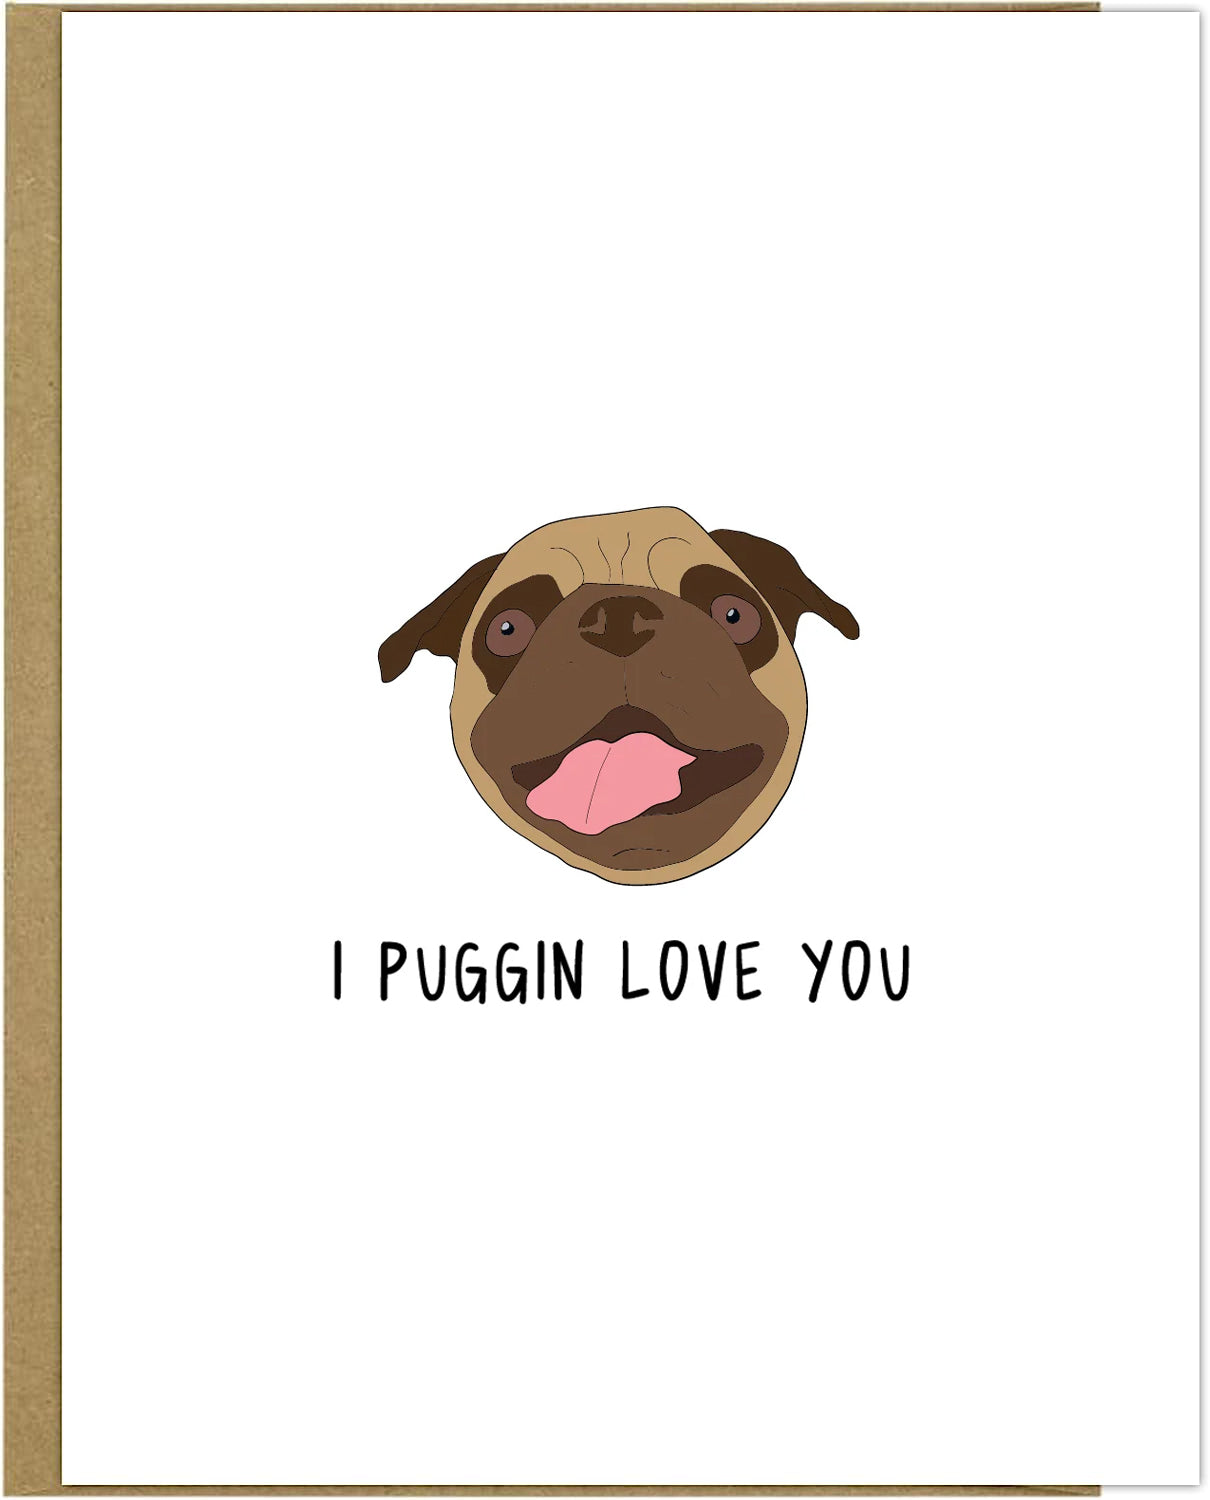 Send a heartfelt rockdoodles Puggin Love You Card complete with adorable pug illustrations, designed to express your affection. The card comes with a matching envelope for convenience.